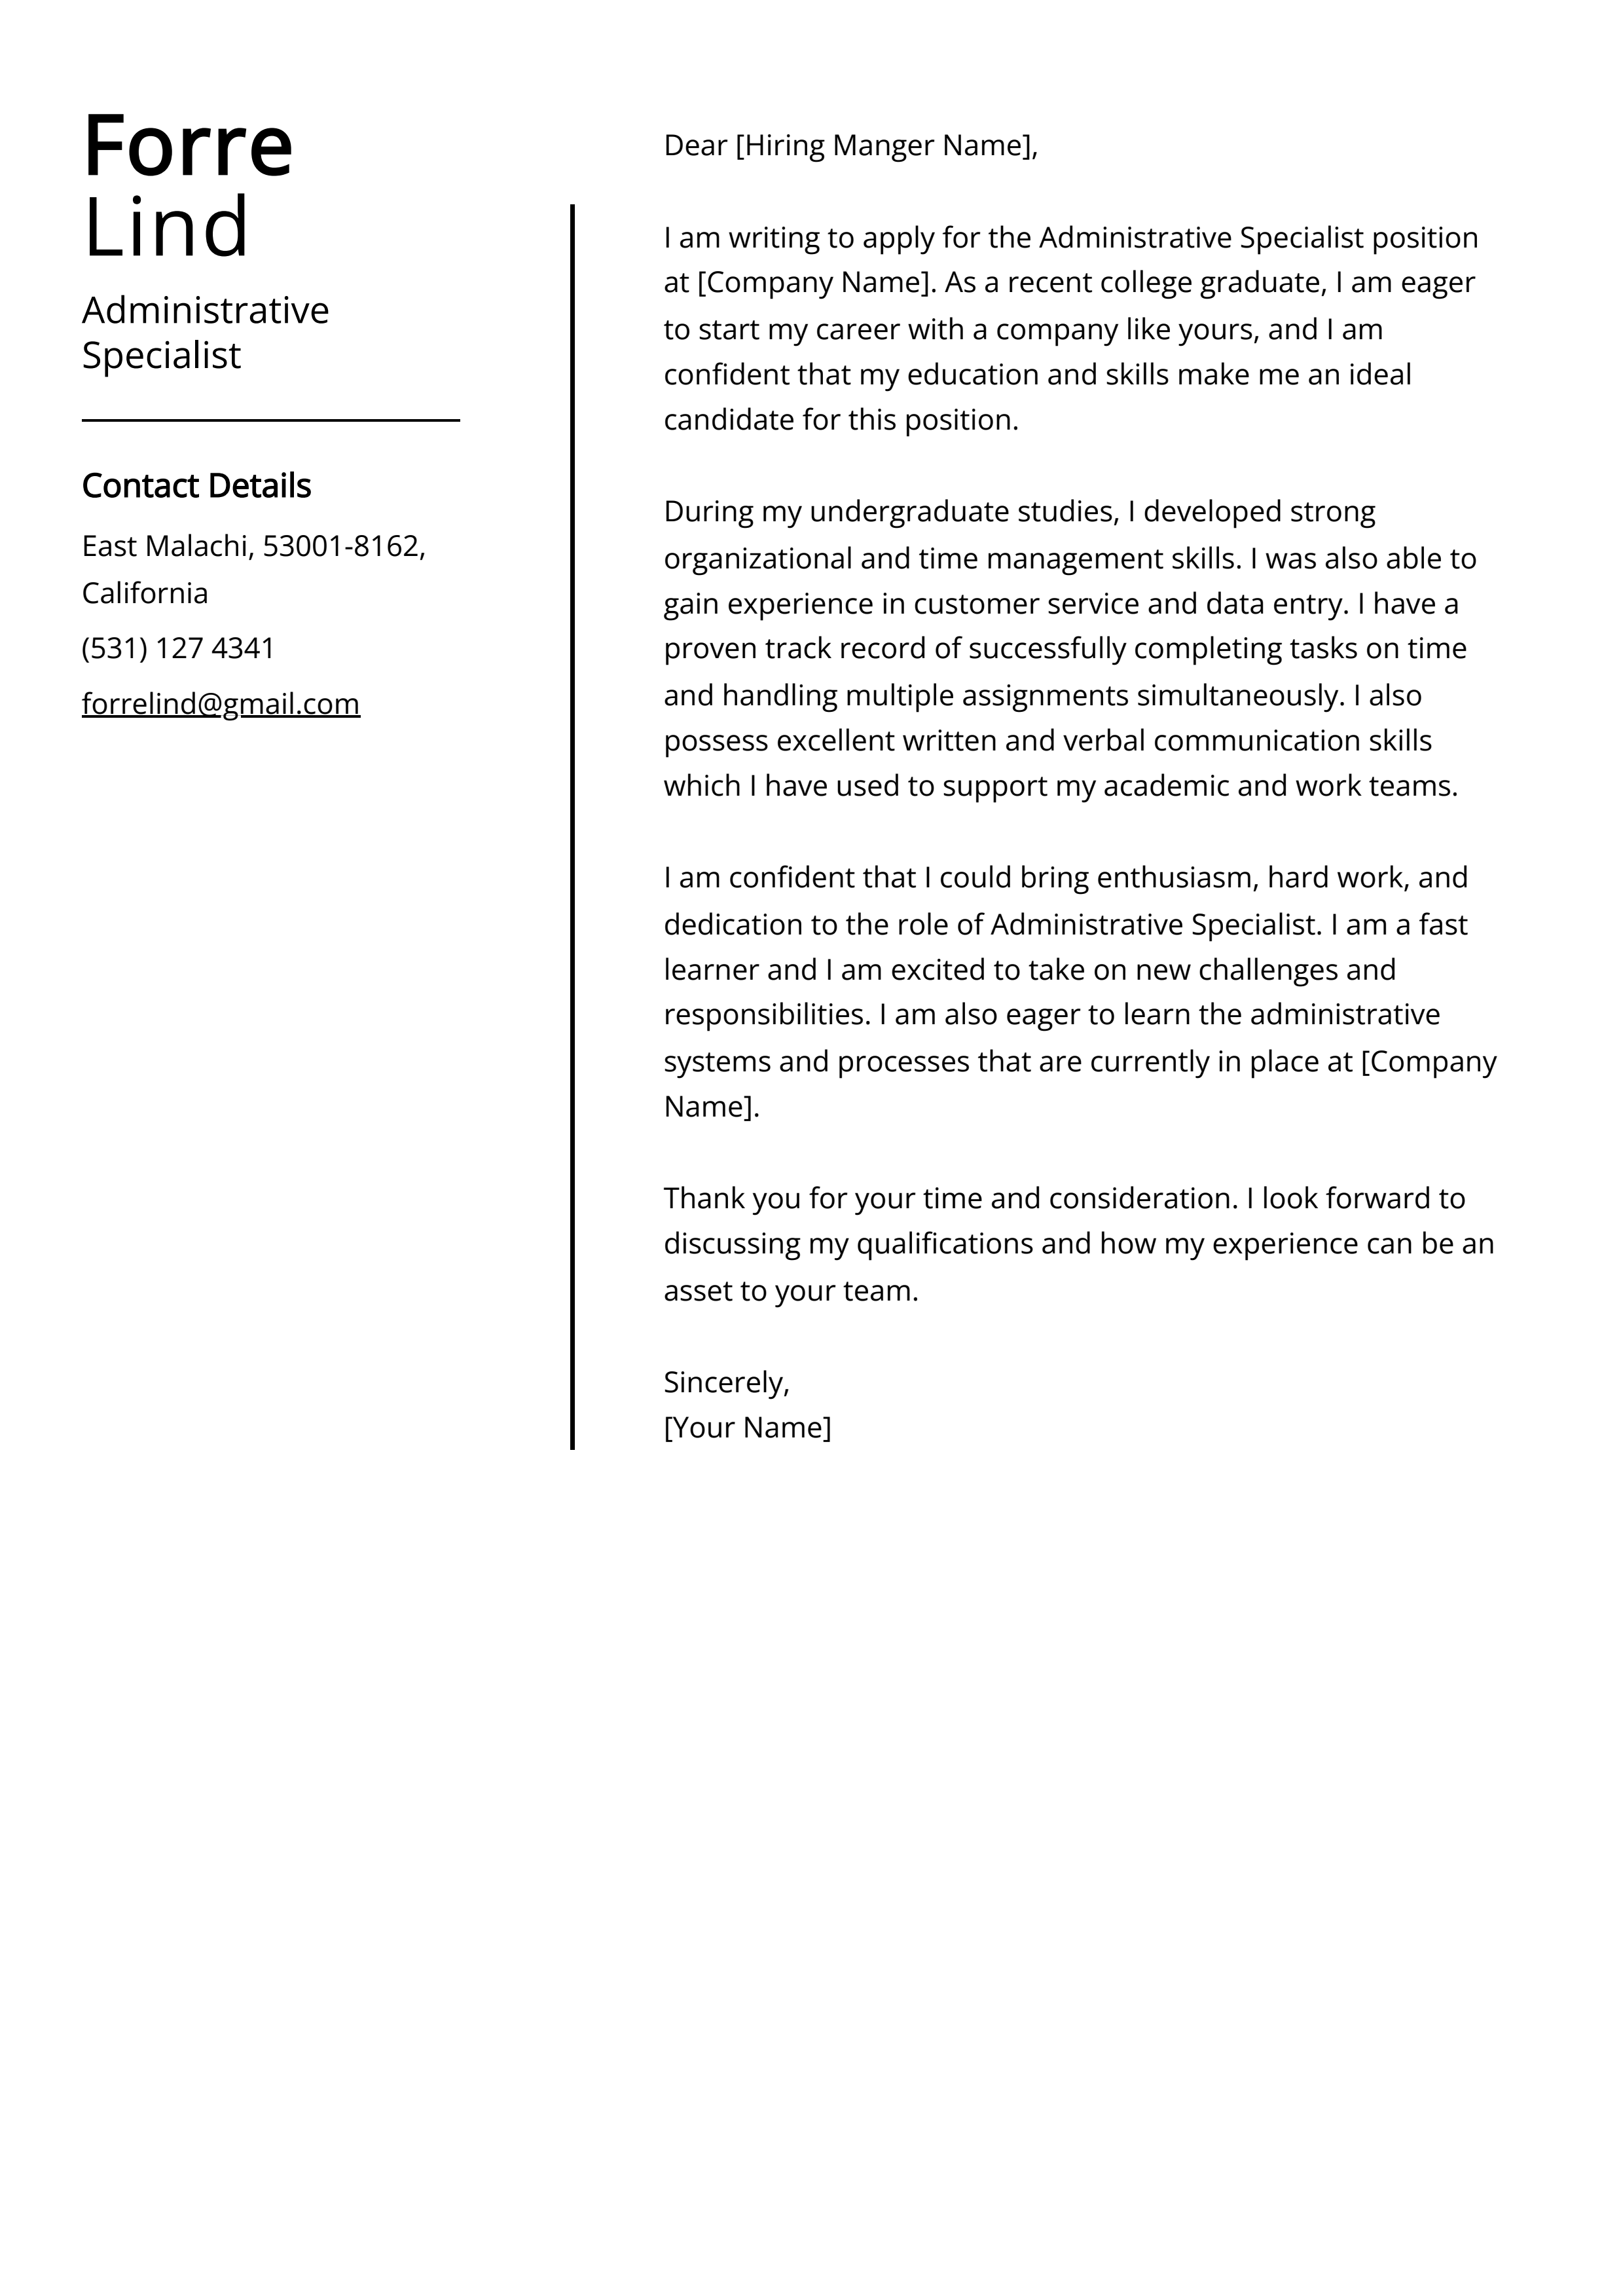 Administrative Specialist Cover Letter Example